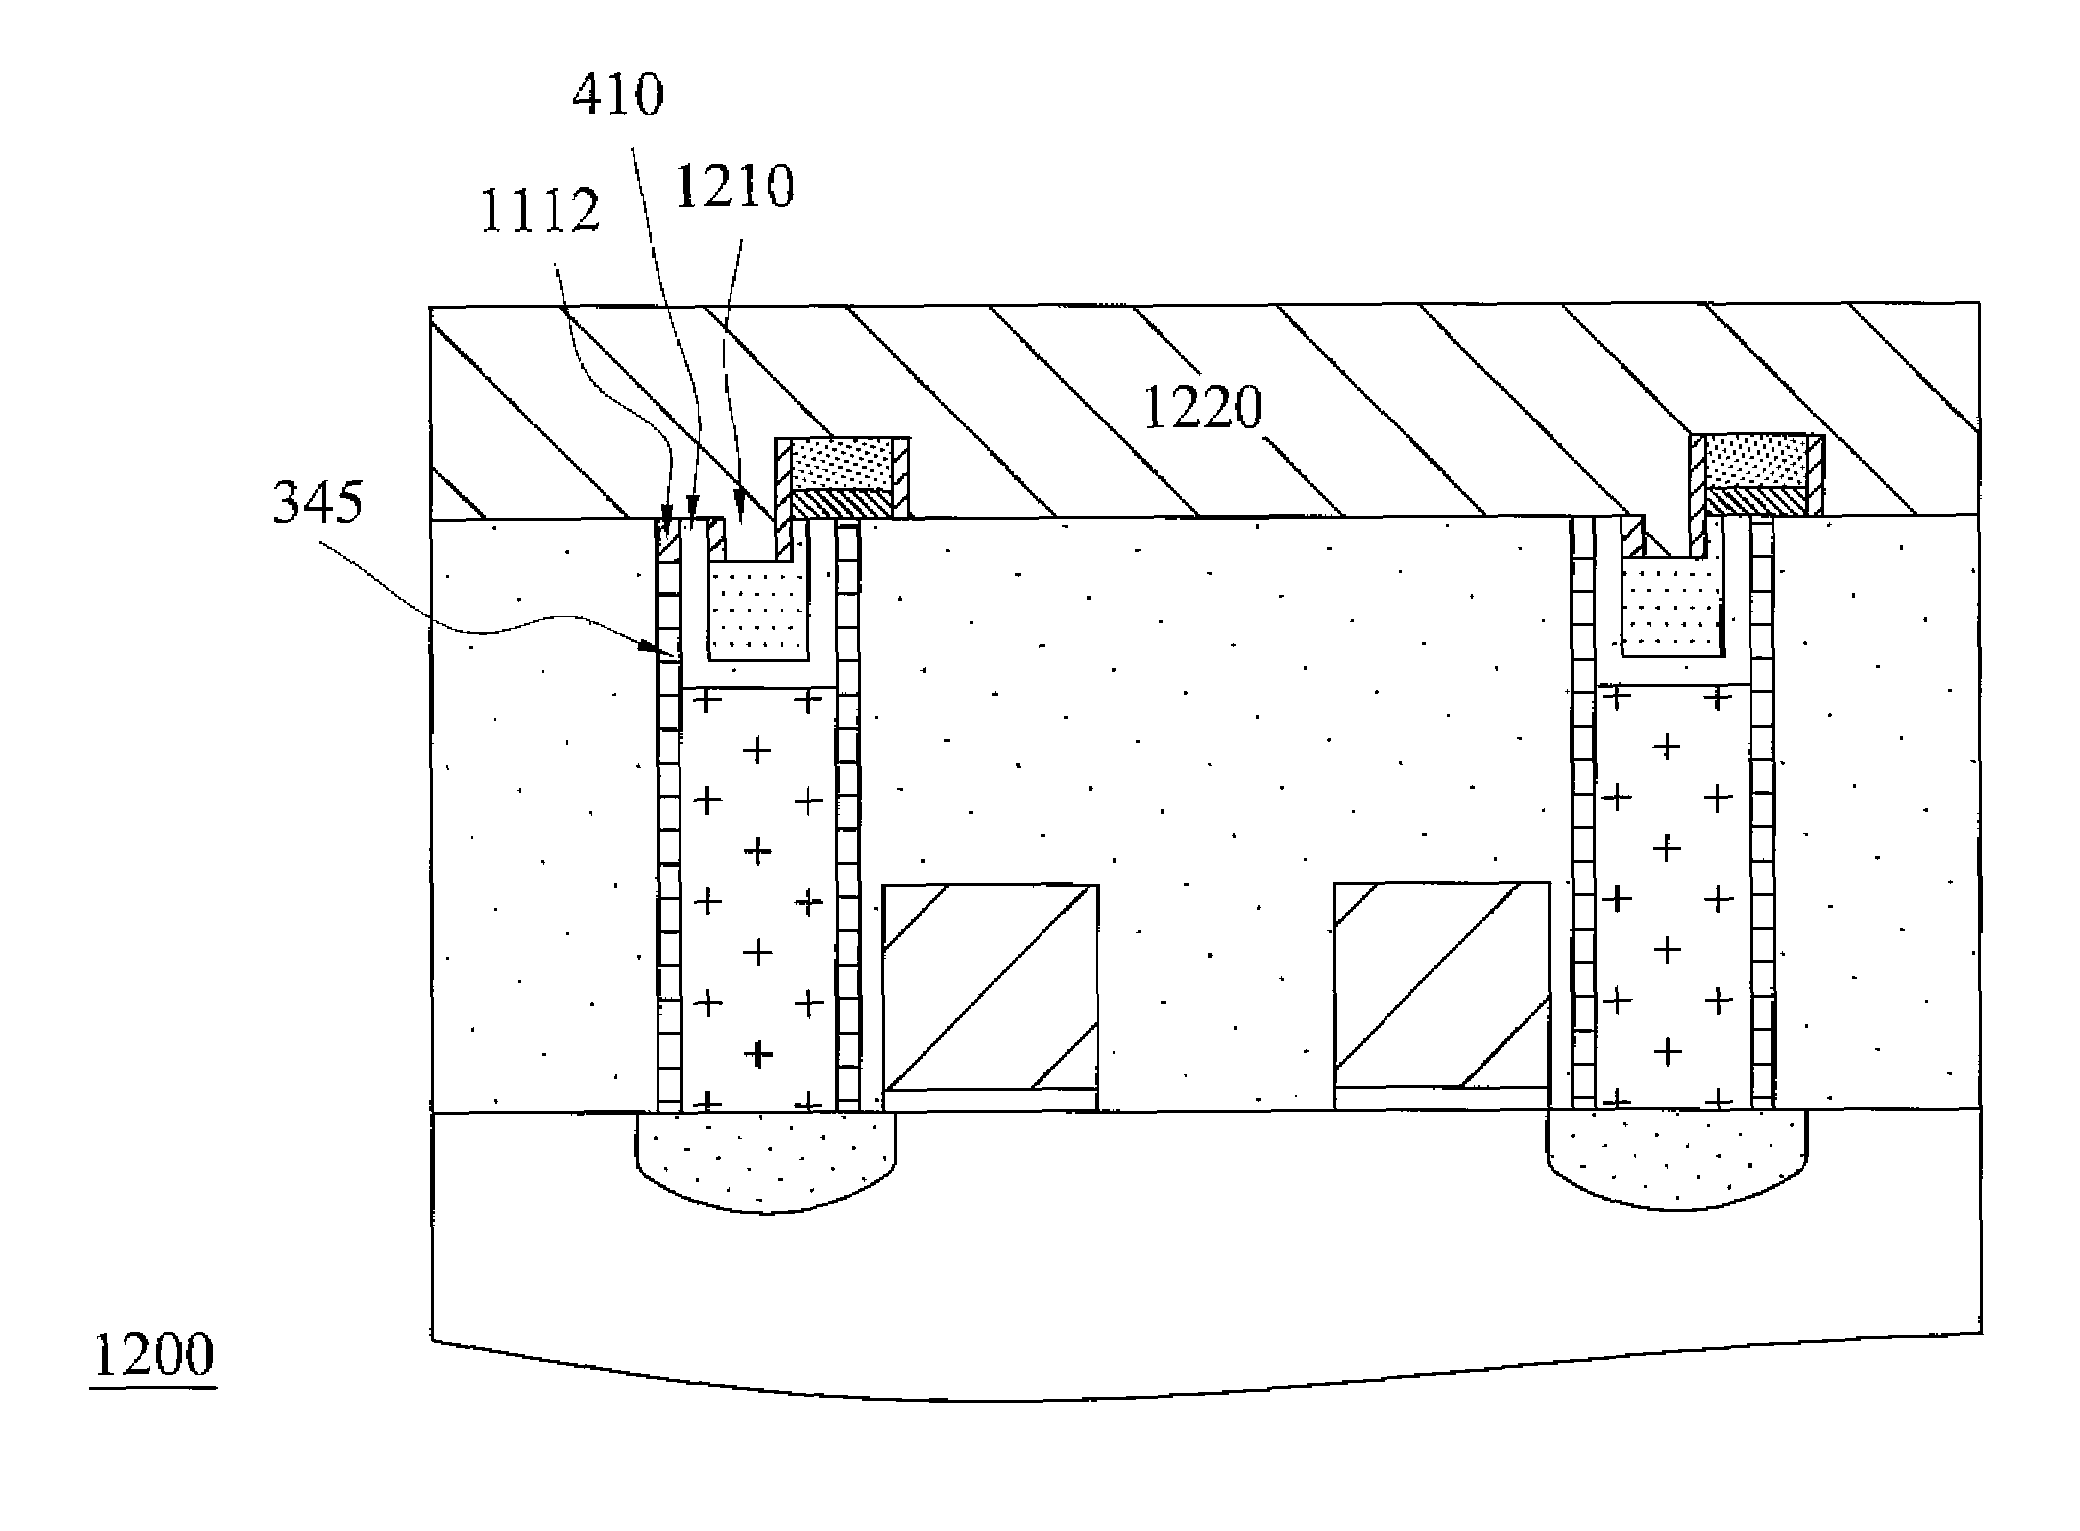 Bridge resistance random access memory device with a singular contact structure